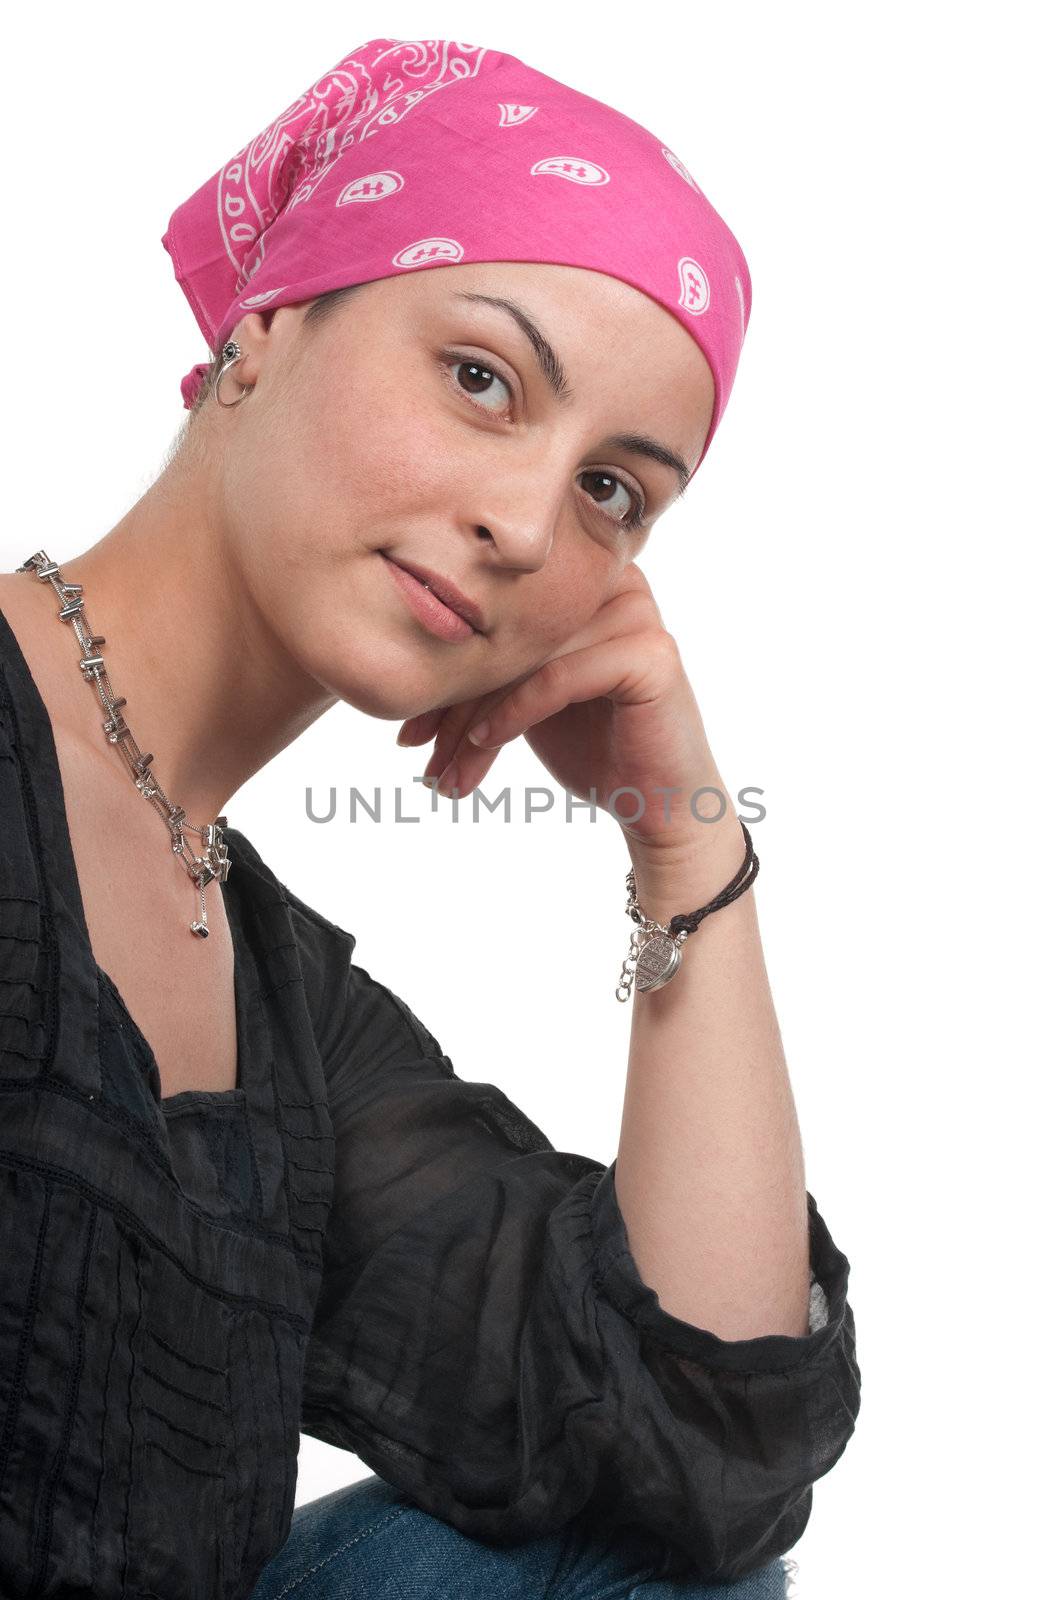 Brave breast cancer survivor two months after chemotherapy